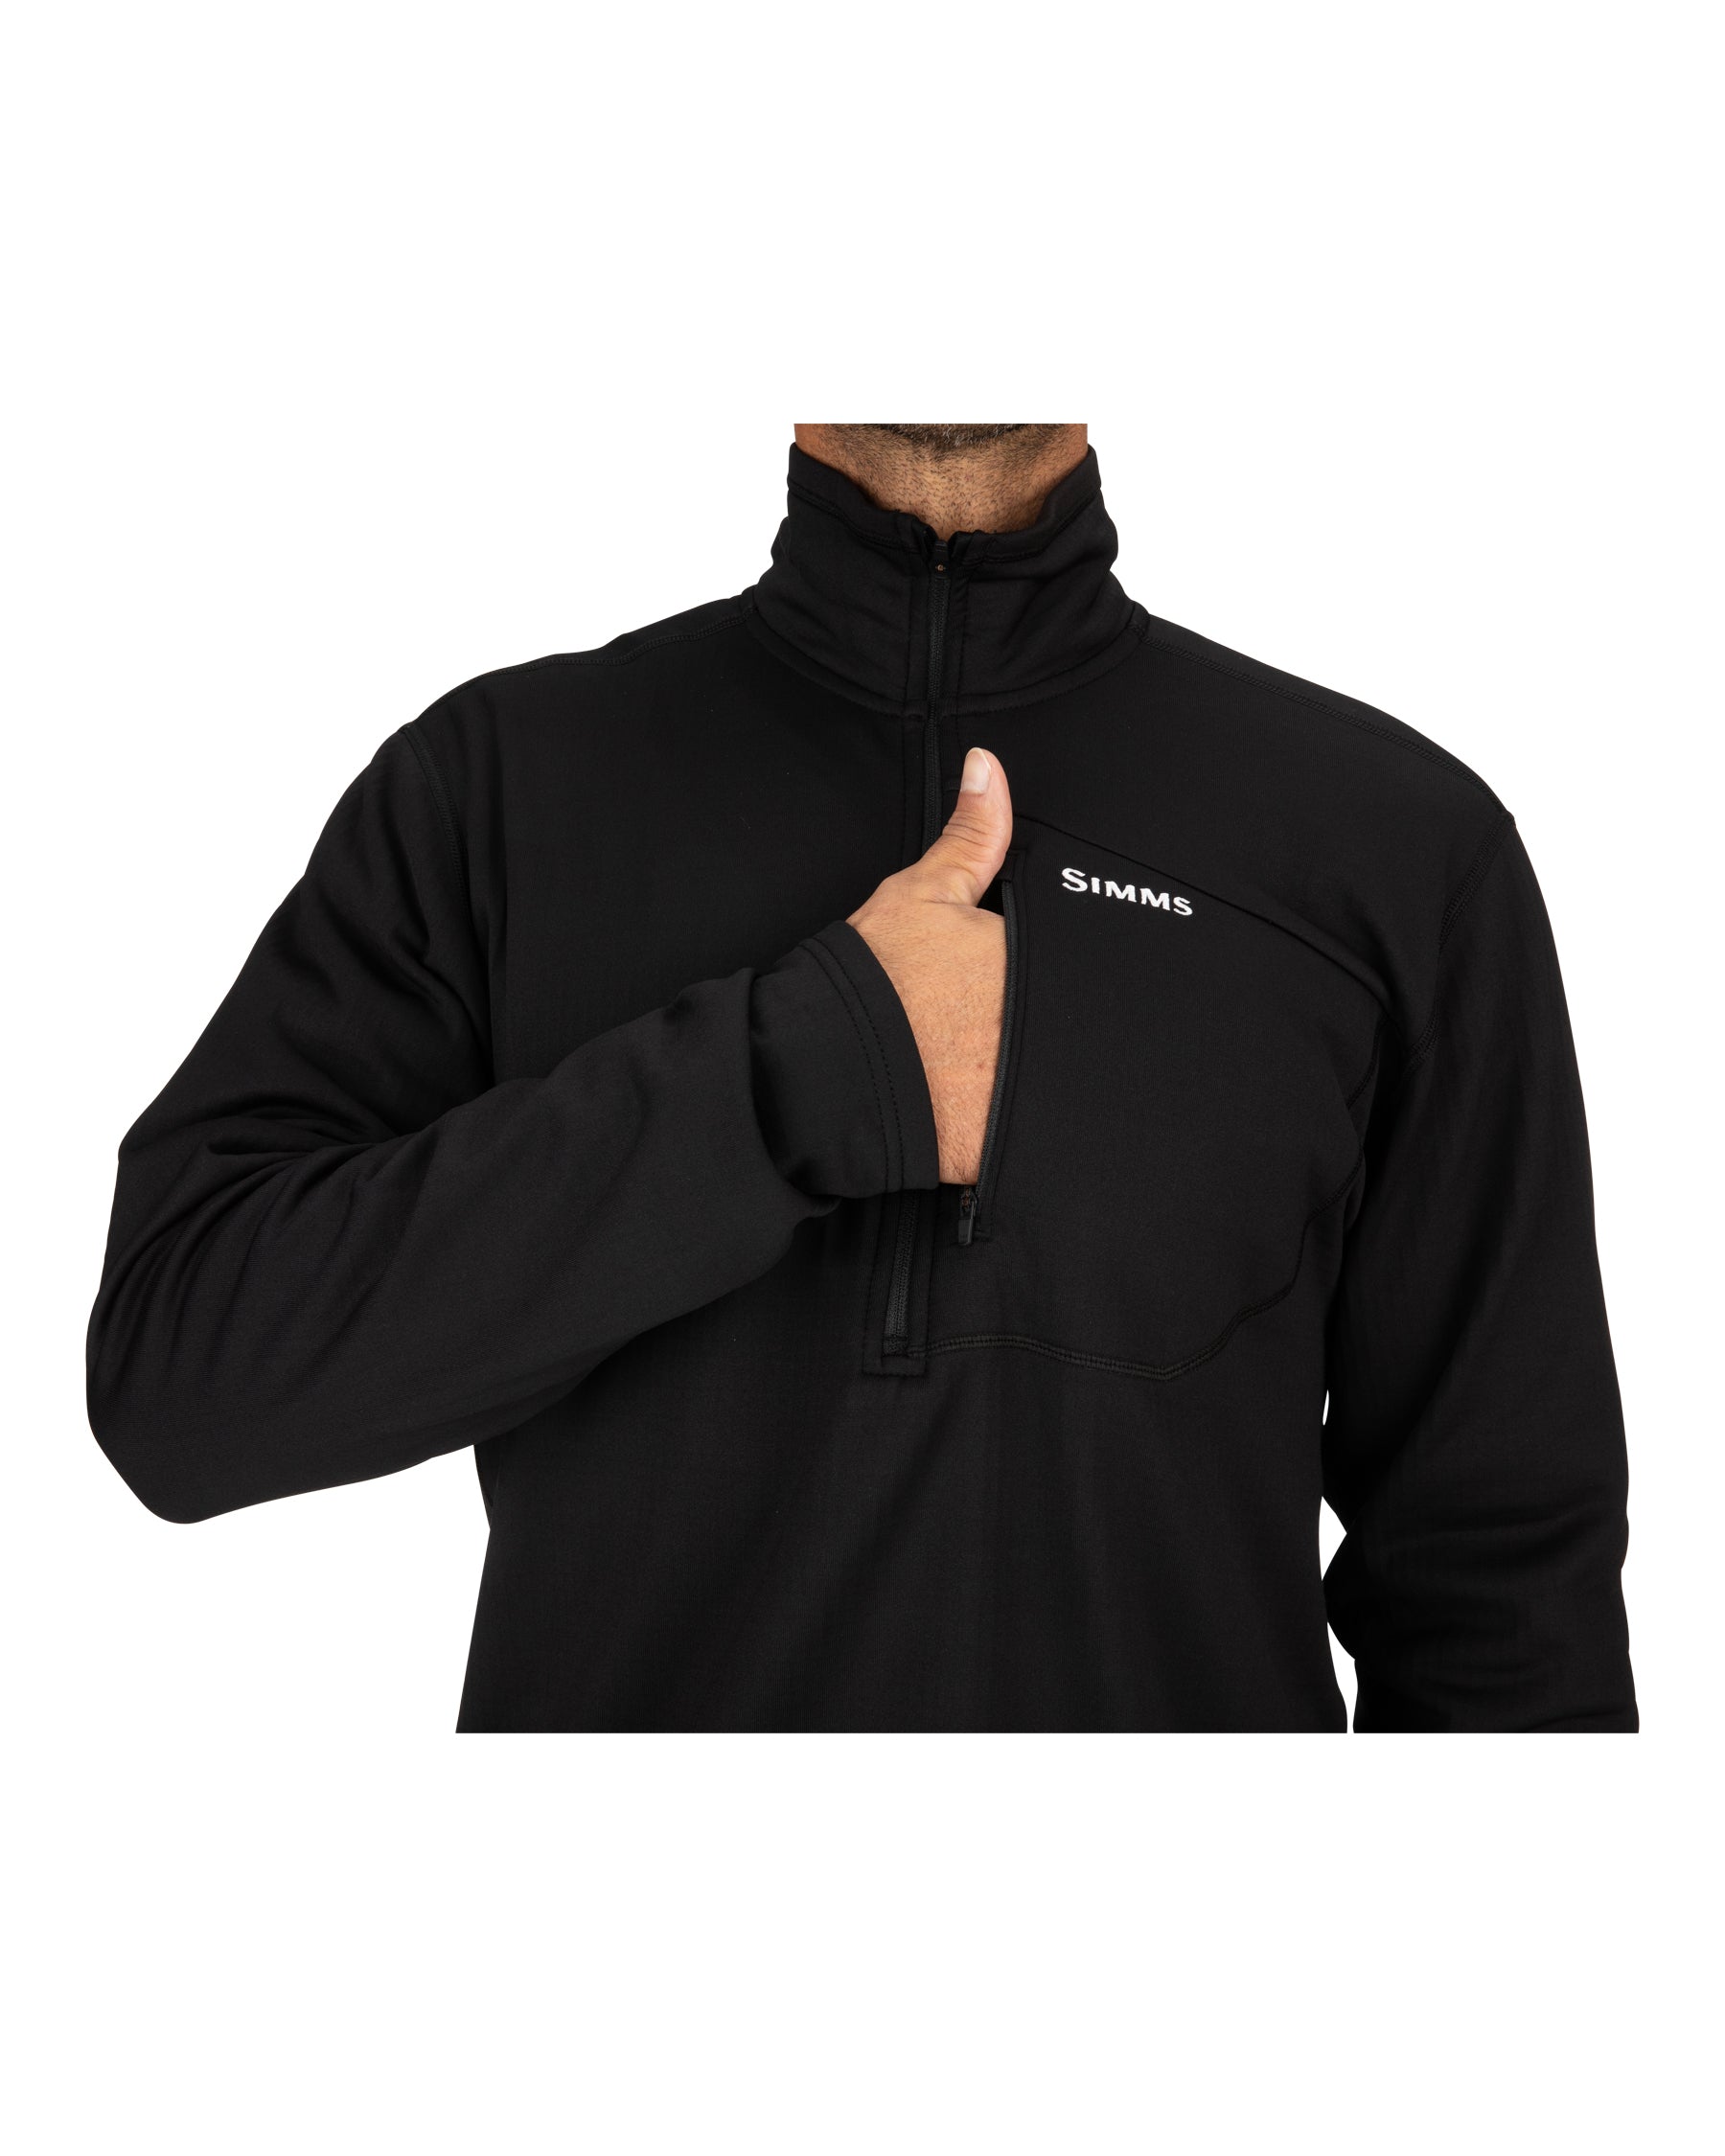 M's Thermal Qtr Midlayer Zip Top | Simms Fishing Products